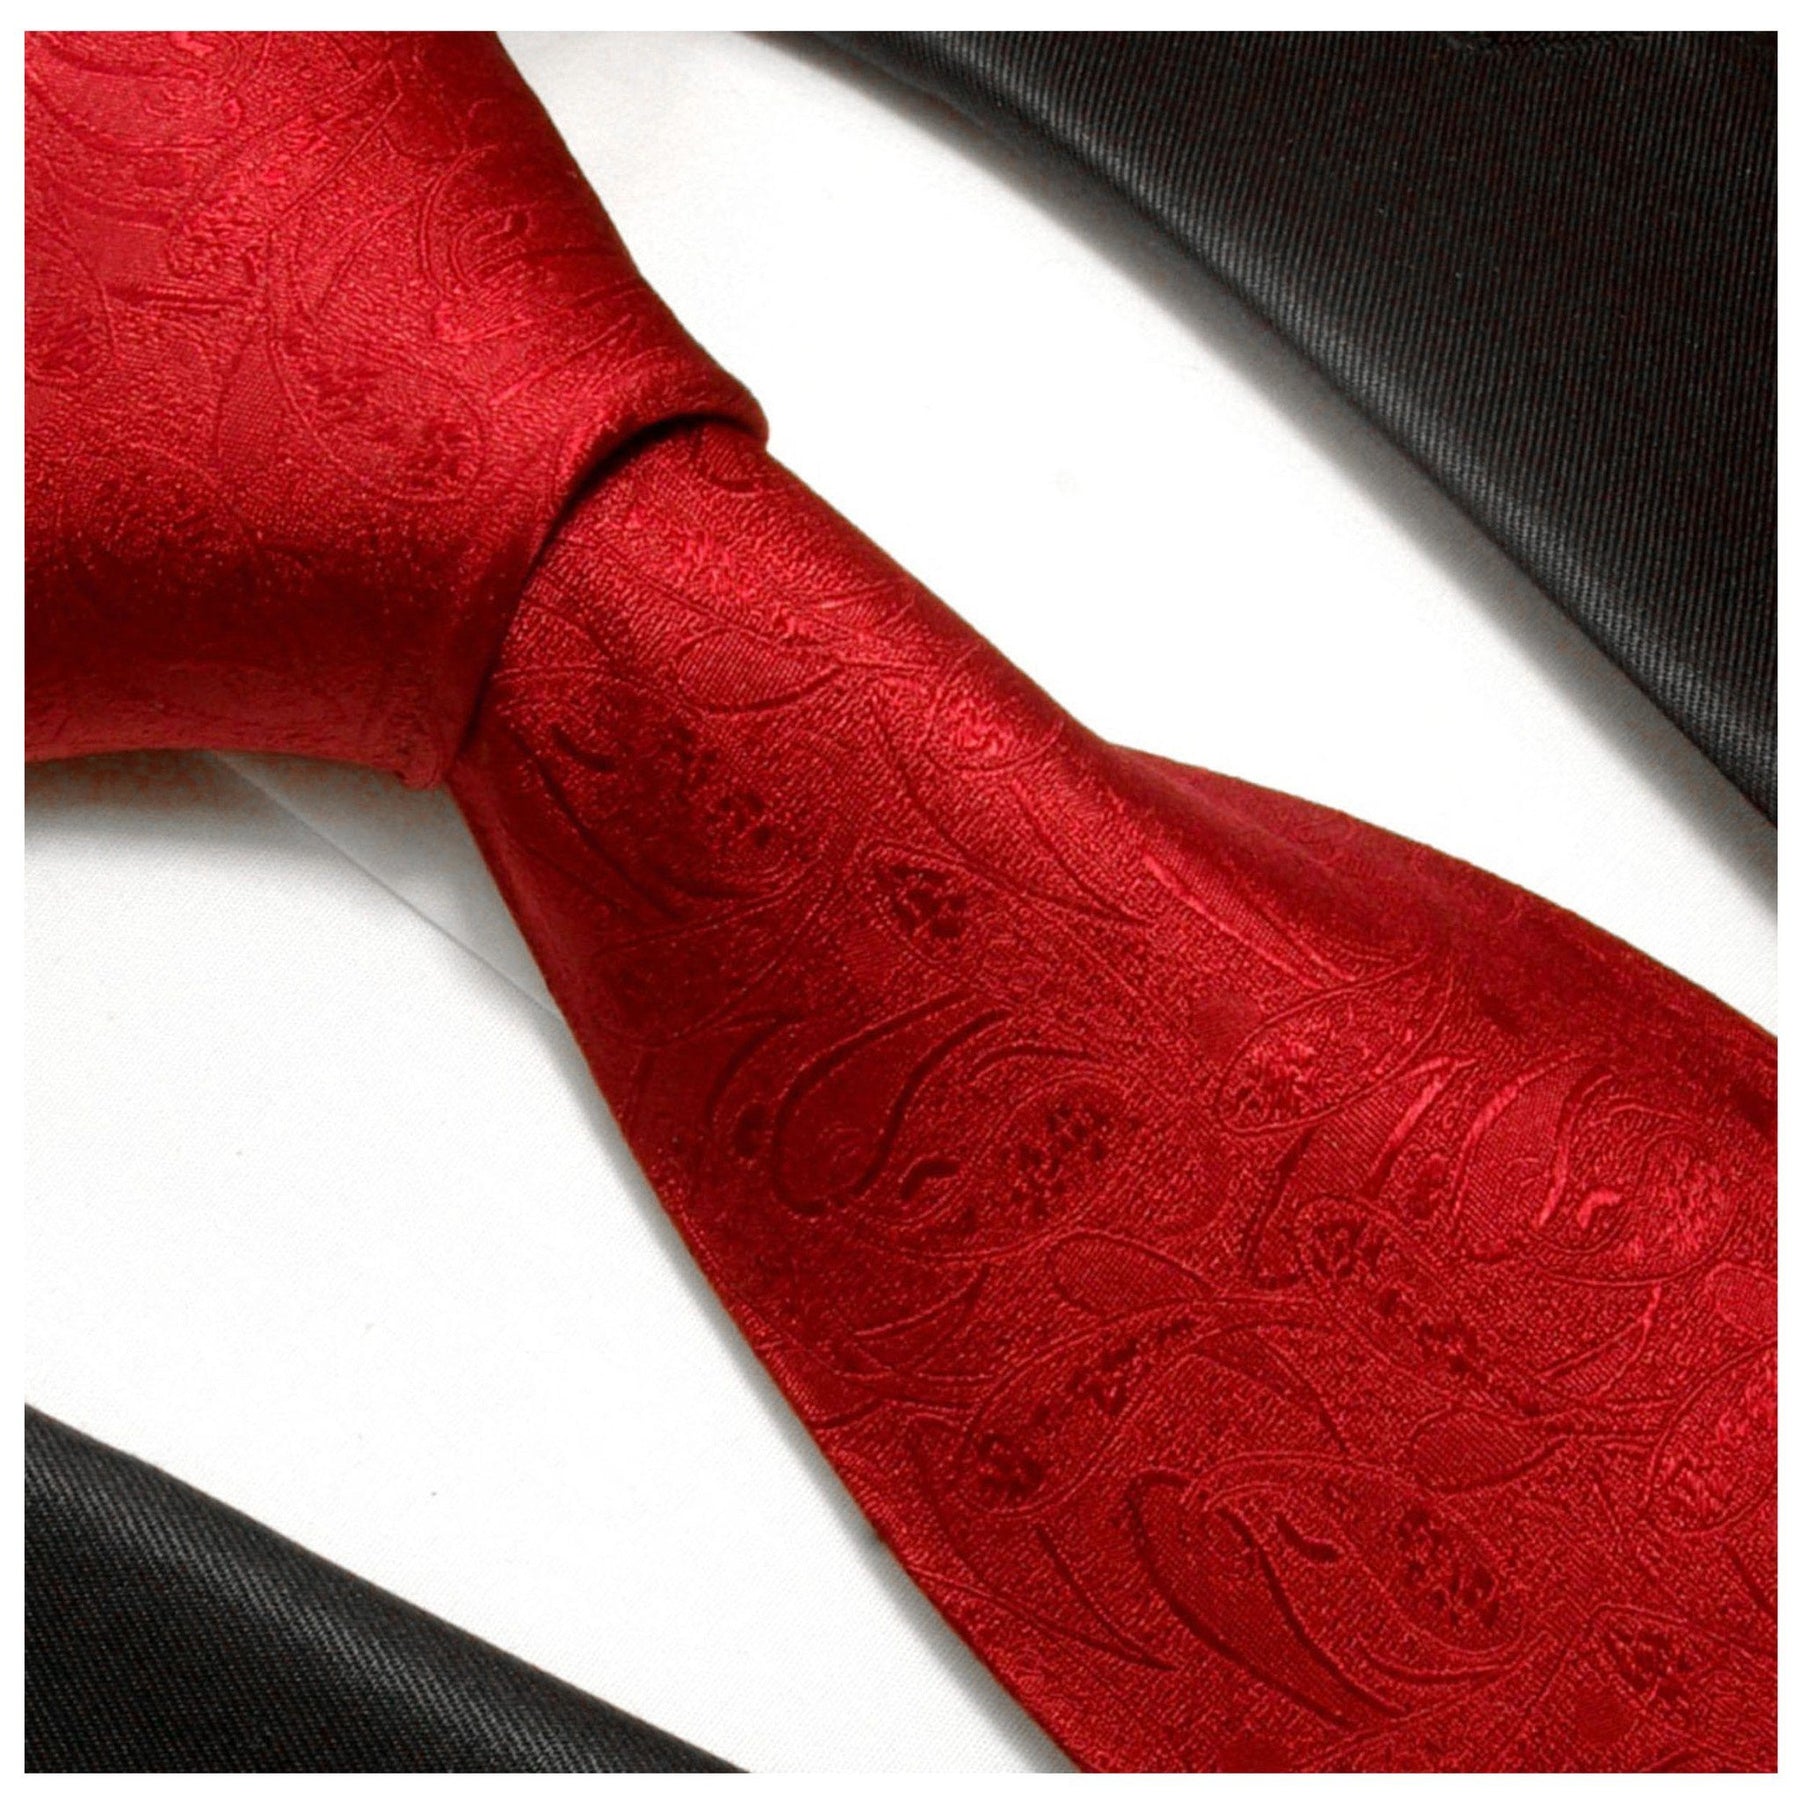 Red and Black Silk Necktie Set by Paul Malone, Classic (58In. x 3.25In.) / Red